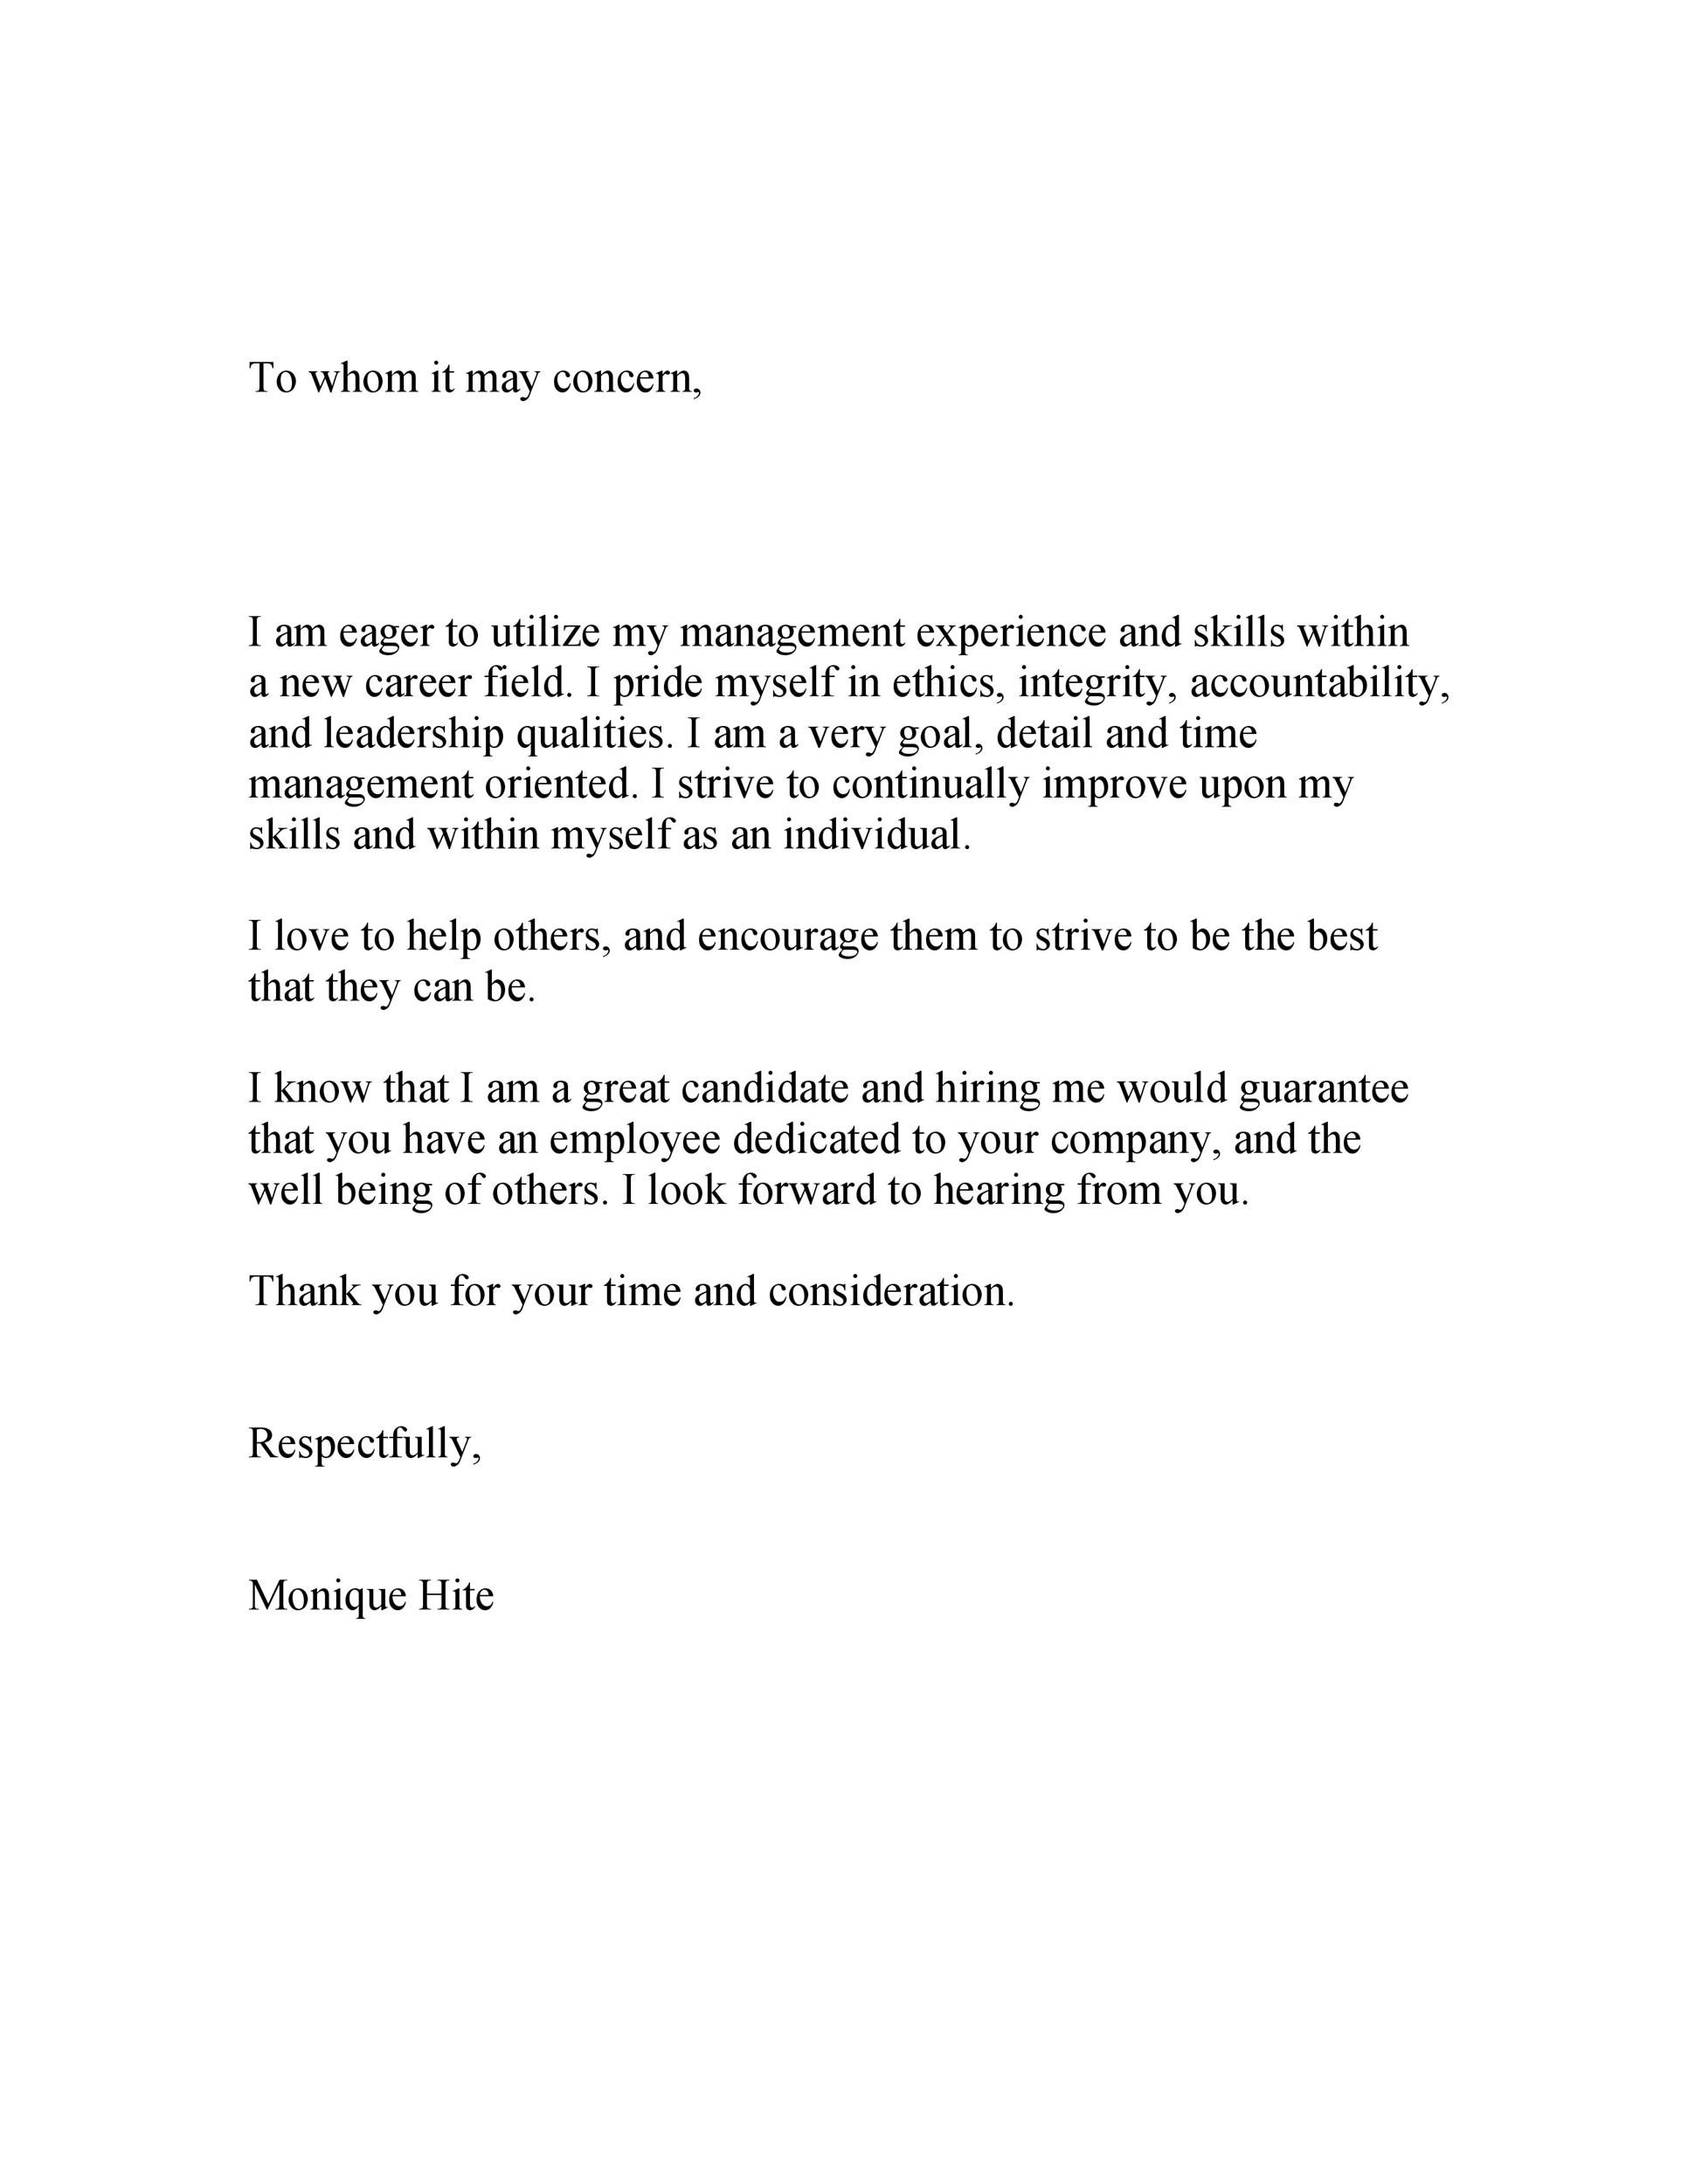 how to address a cover letter to whom it may concern